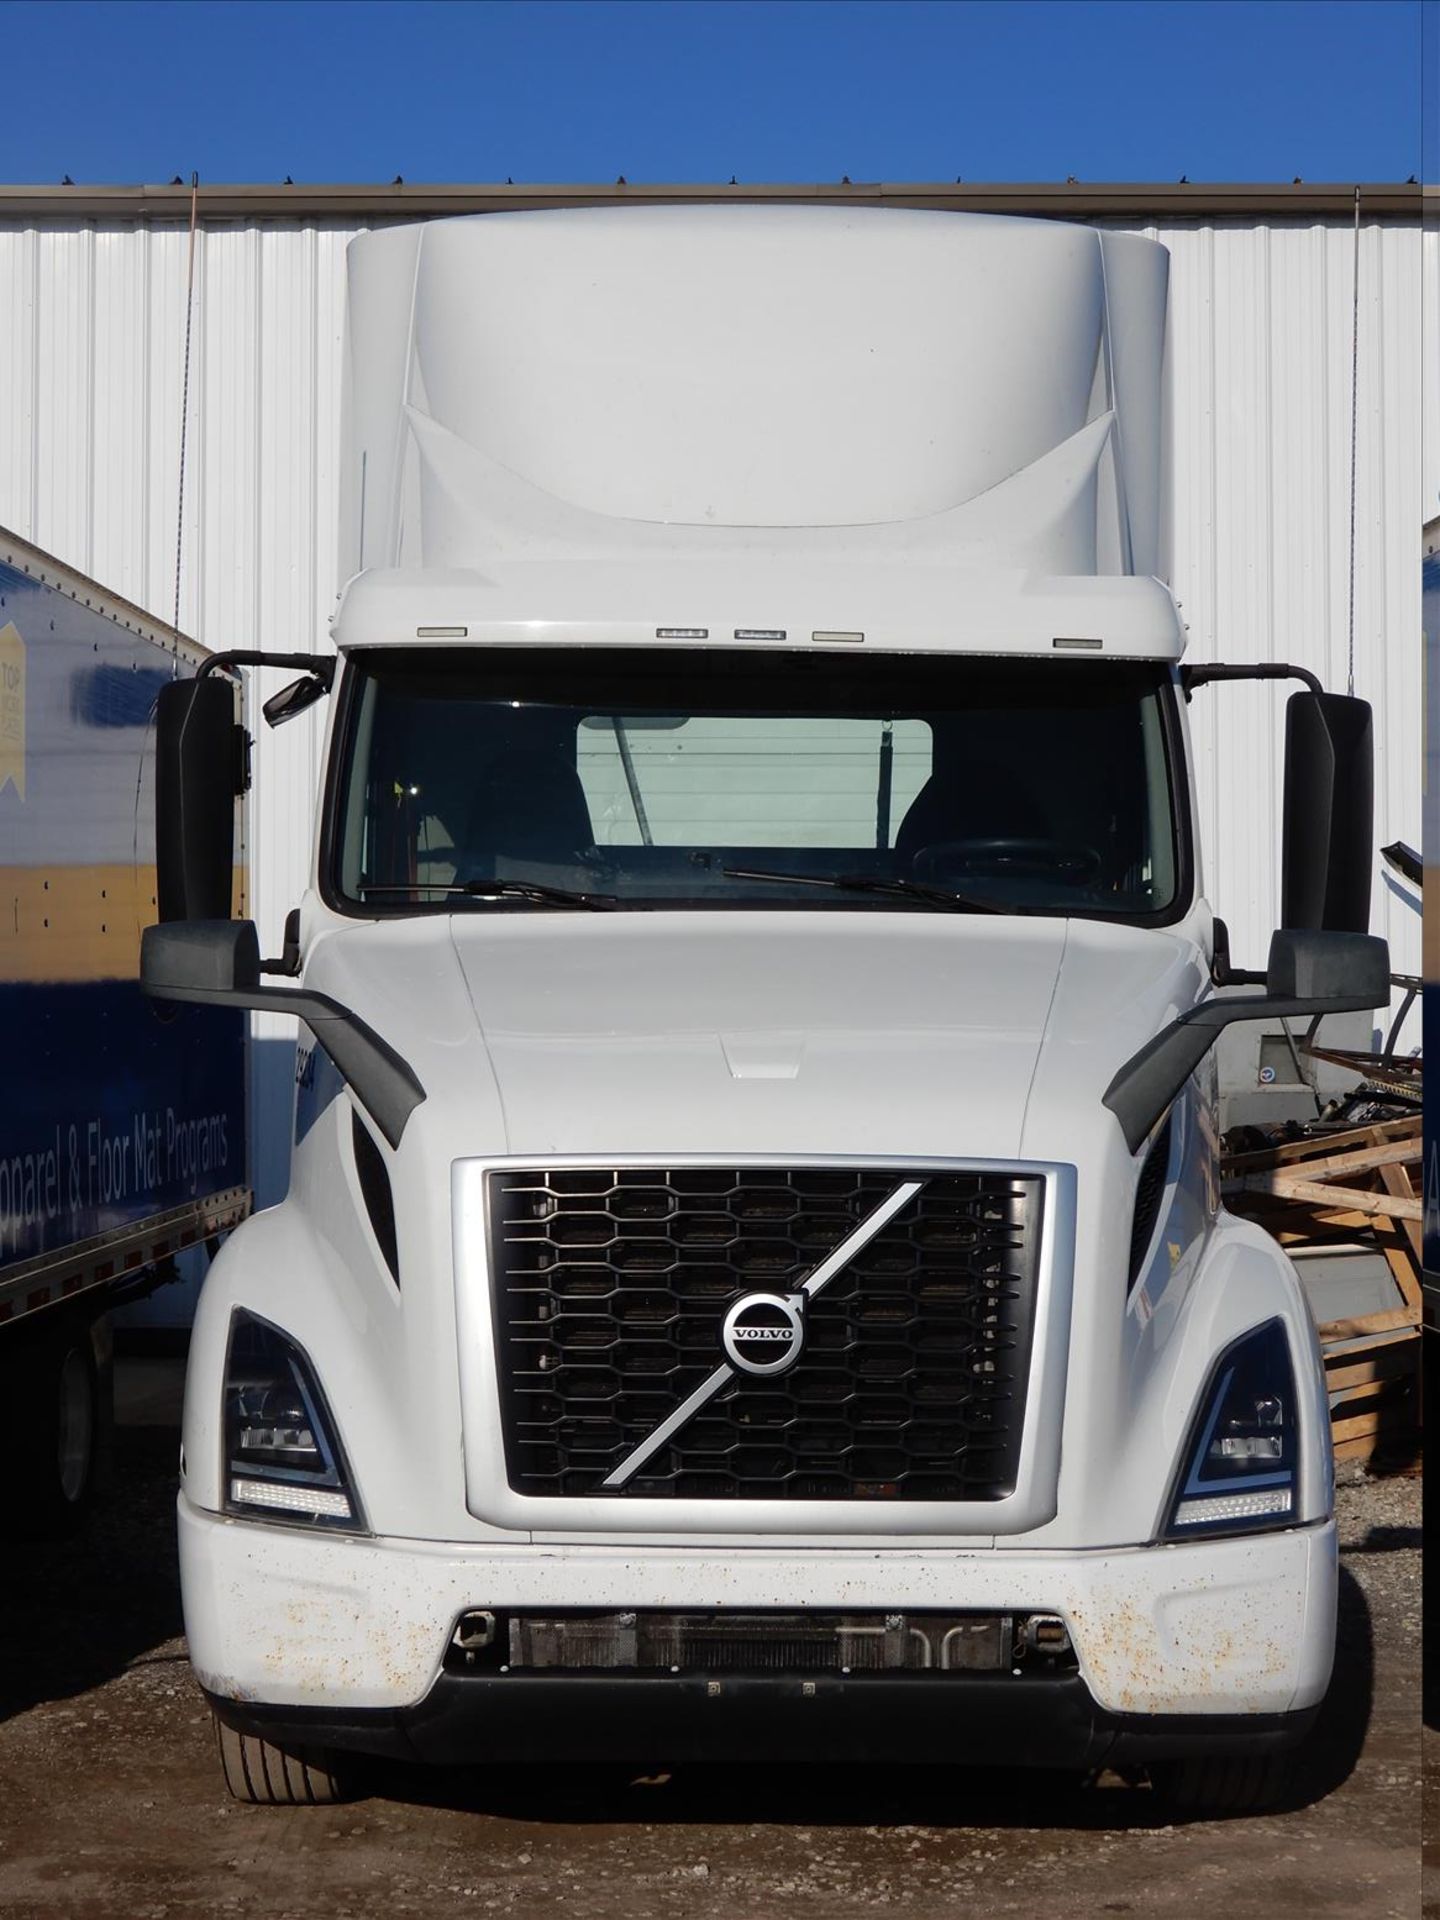 2019 Volvo VNR 300 Daycab Truck Tractor - Located in Indianapolis, IN - Image 2 of 61